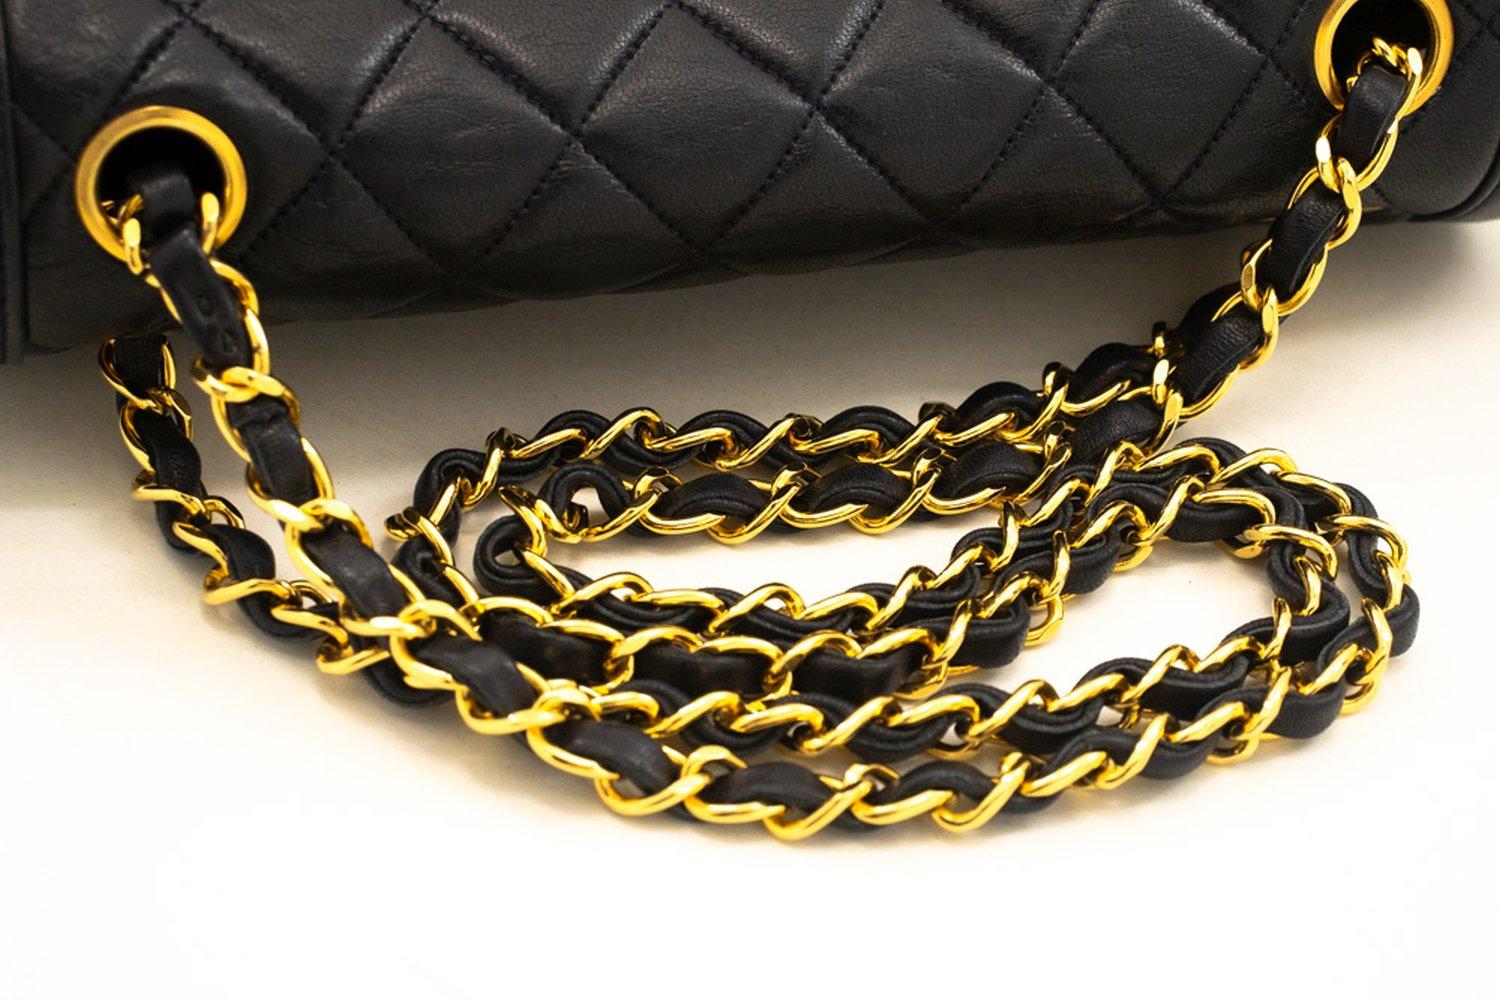 CHANEL NAVY Vintage Chain Shoulder Bag Lambskin Flap Quilted Purse For Sale 9